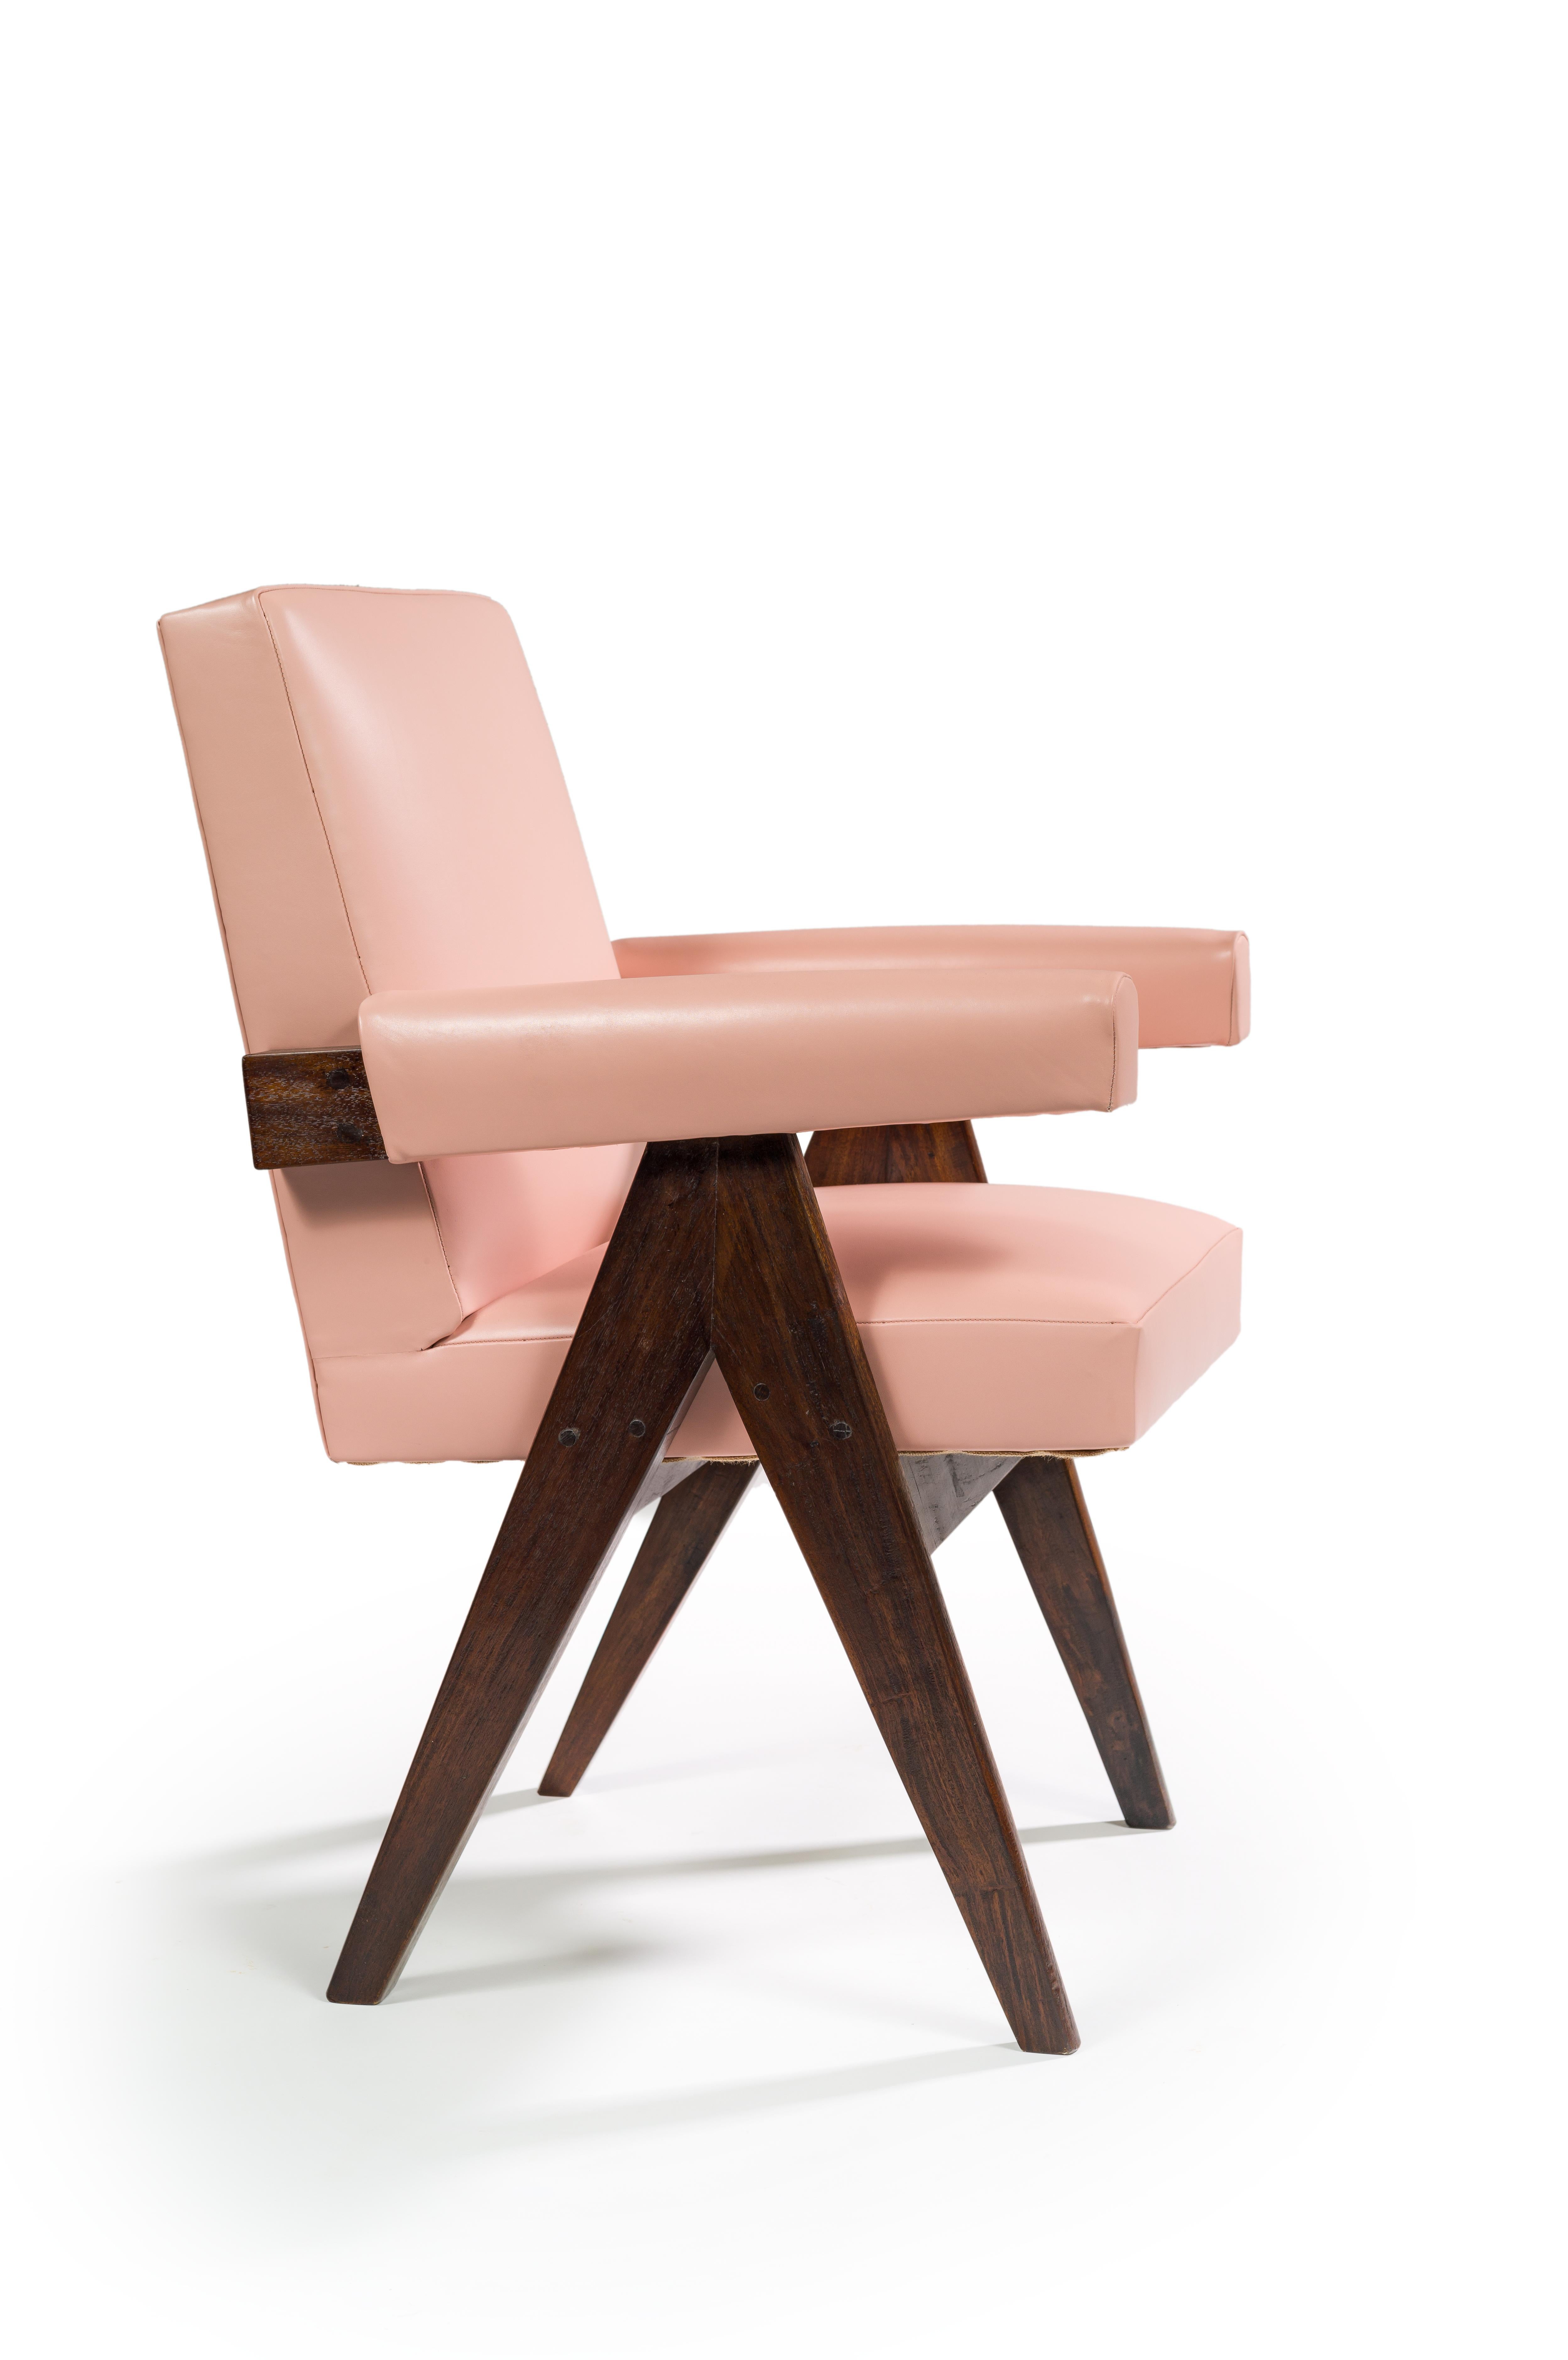 Leather Pierre Jeanneret, PJ-SI-30-C, Committee Armchair, Chandigarh, circa 1955